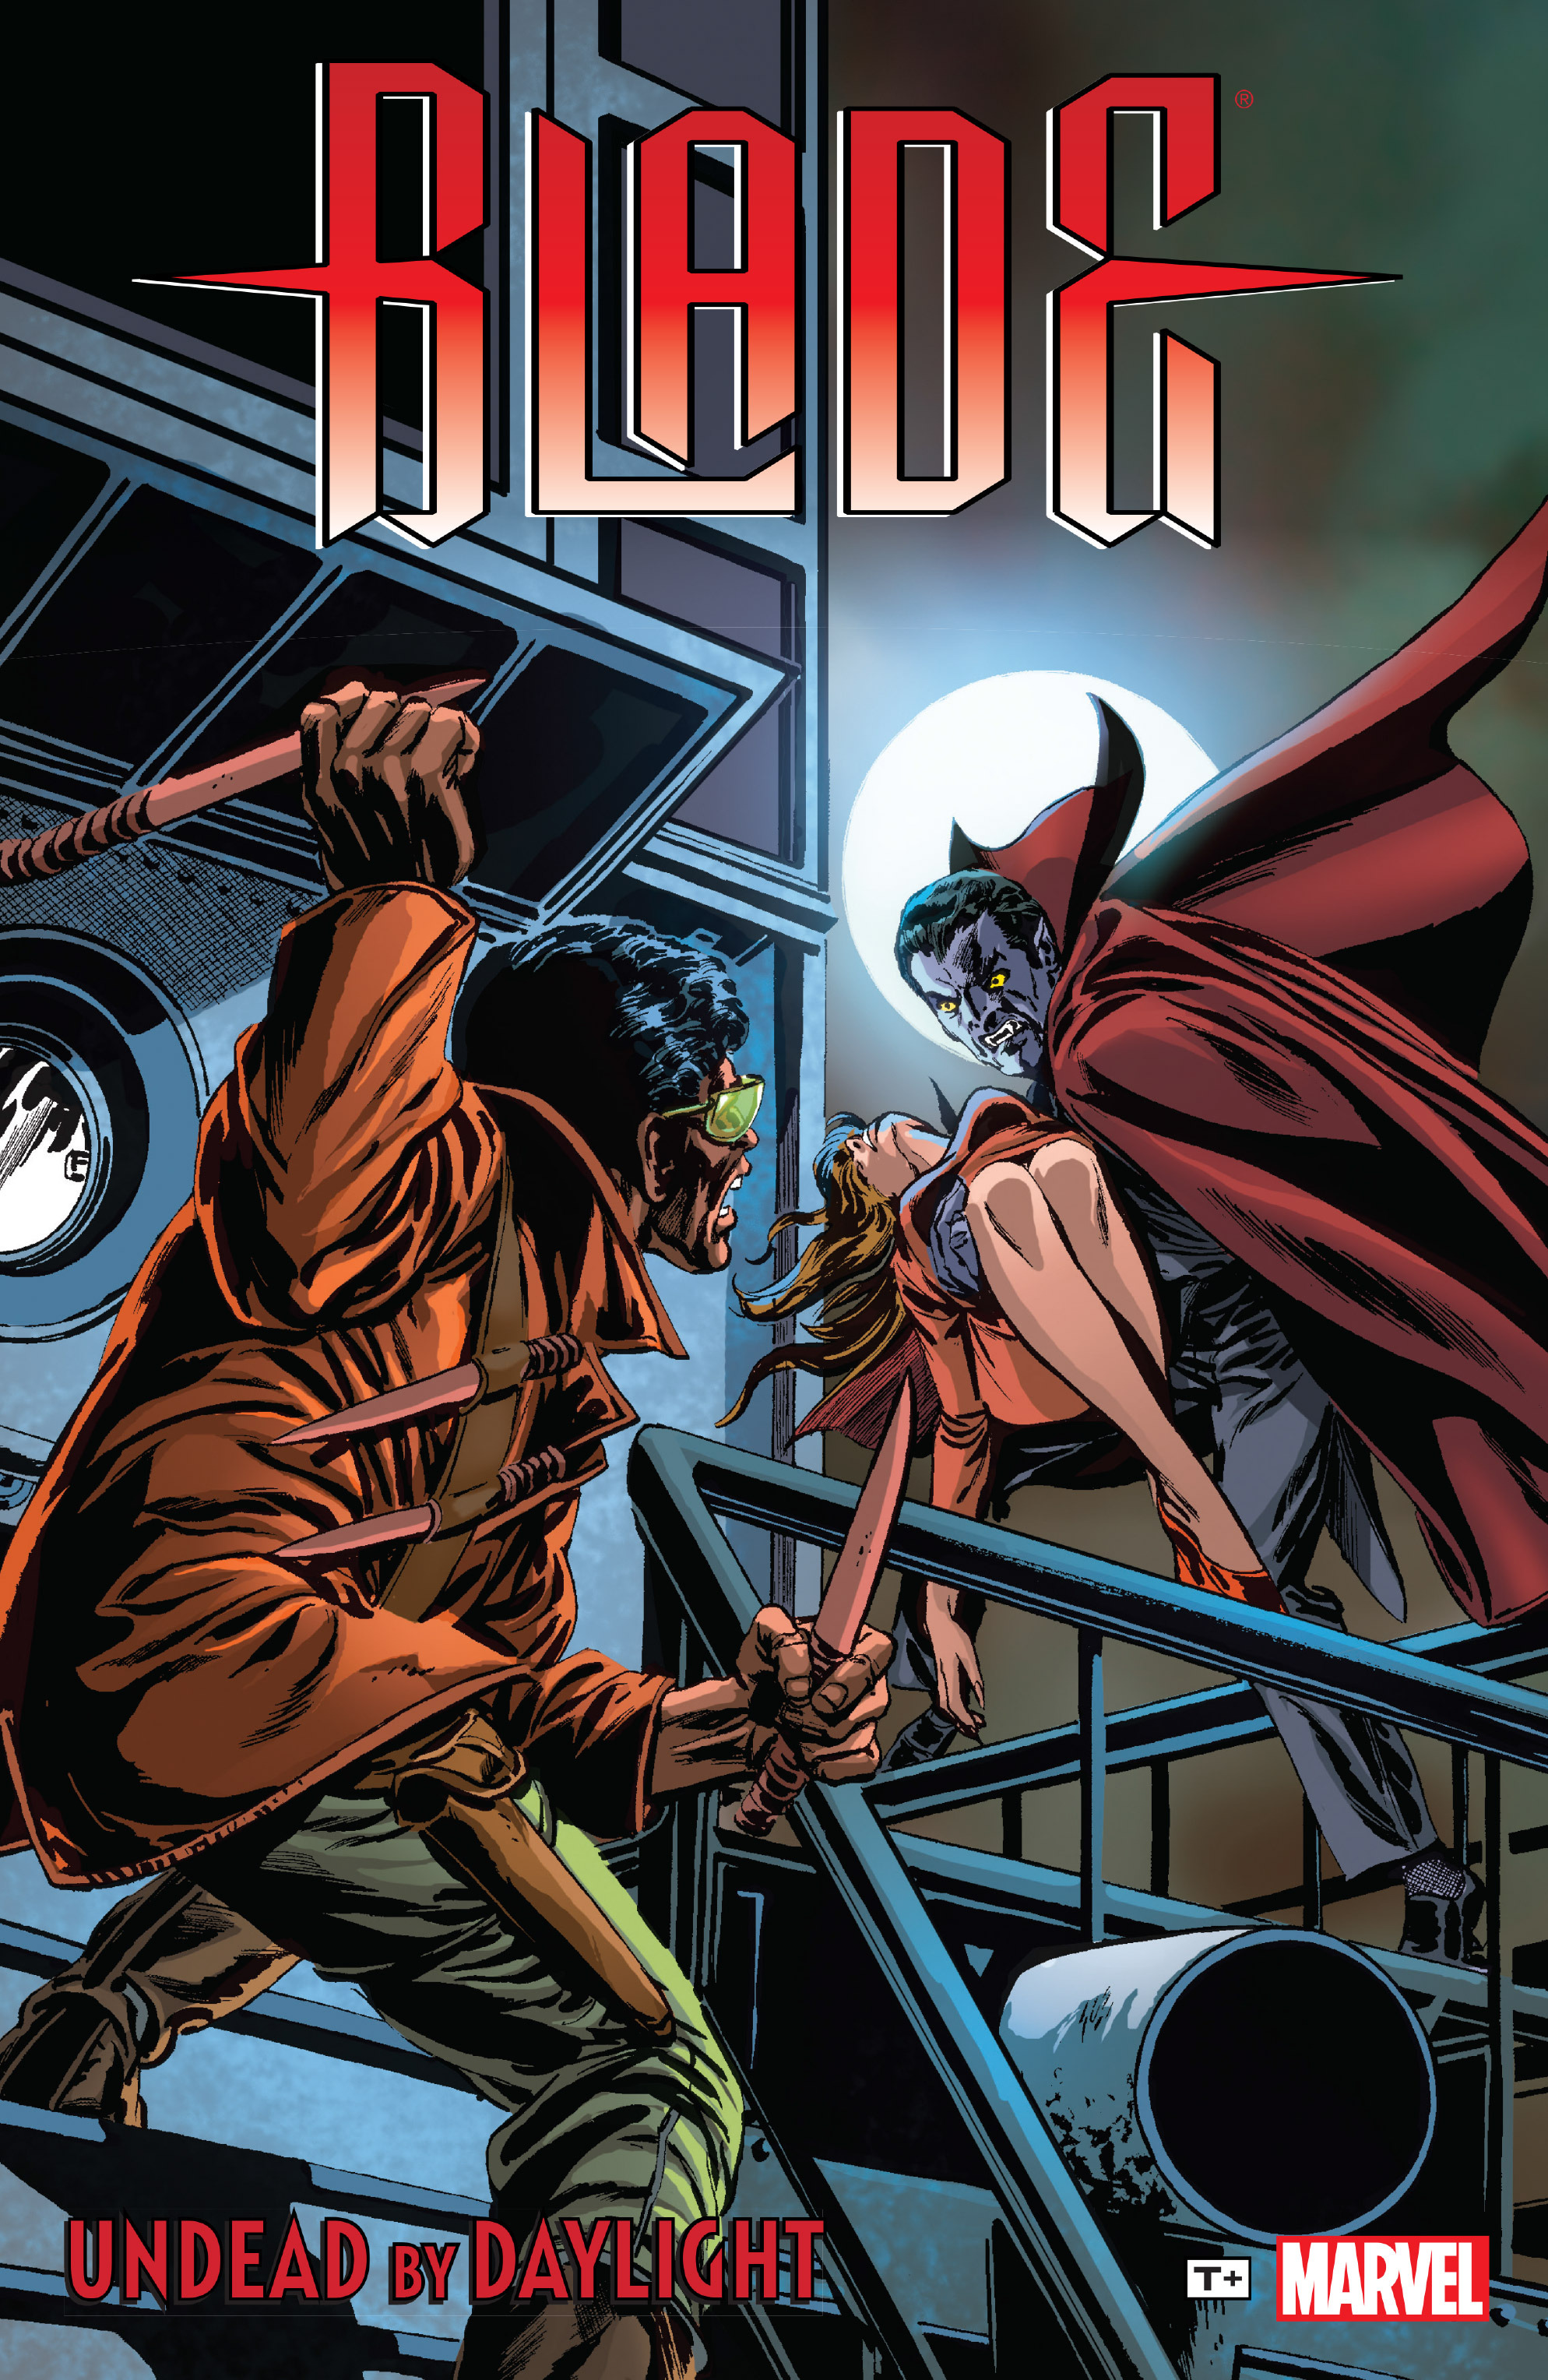 Read online Blade: Undead By Daylight comic -  Issue # Full - 1